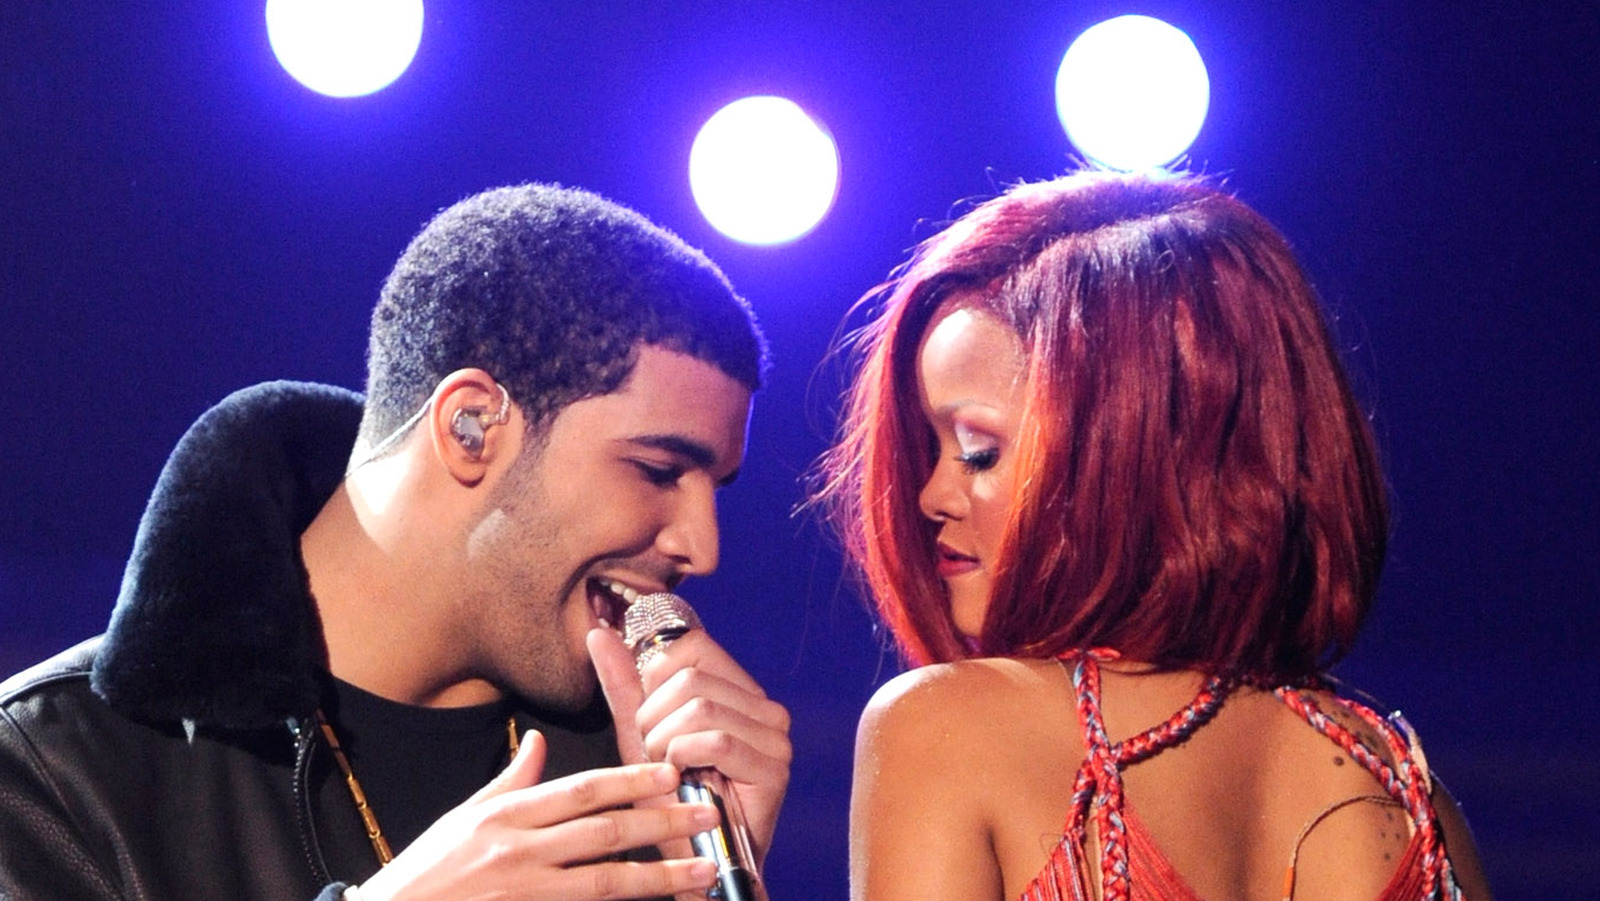 Rihanna closes old chapter of her love life, gets rid of tattoo she shared  with Drake